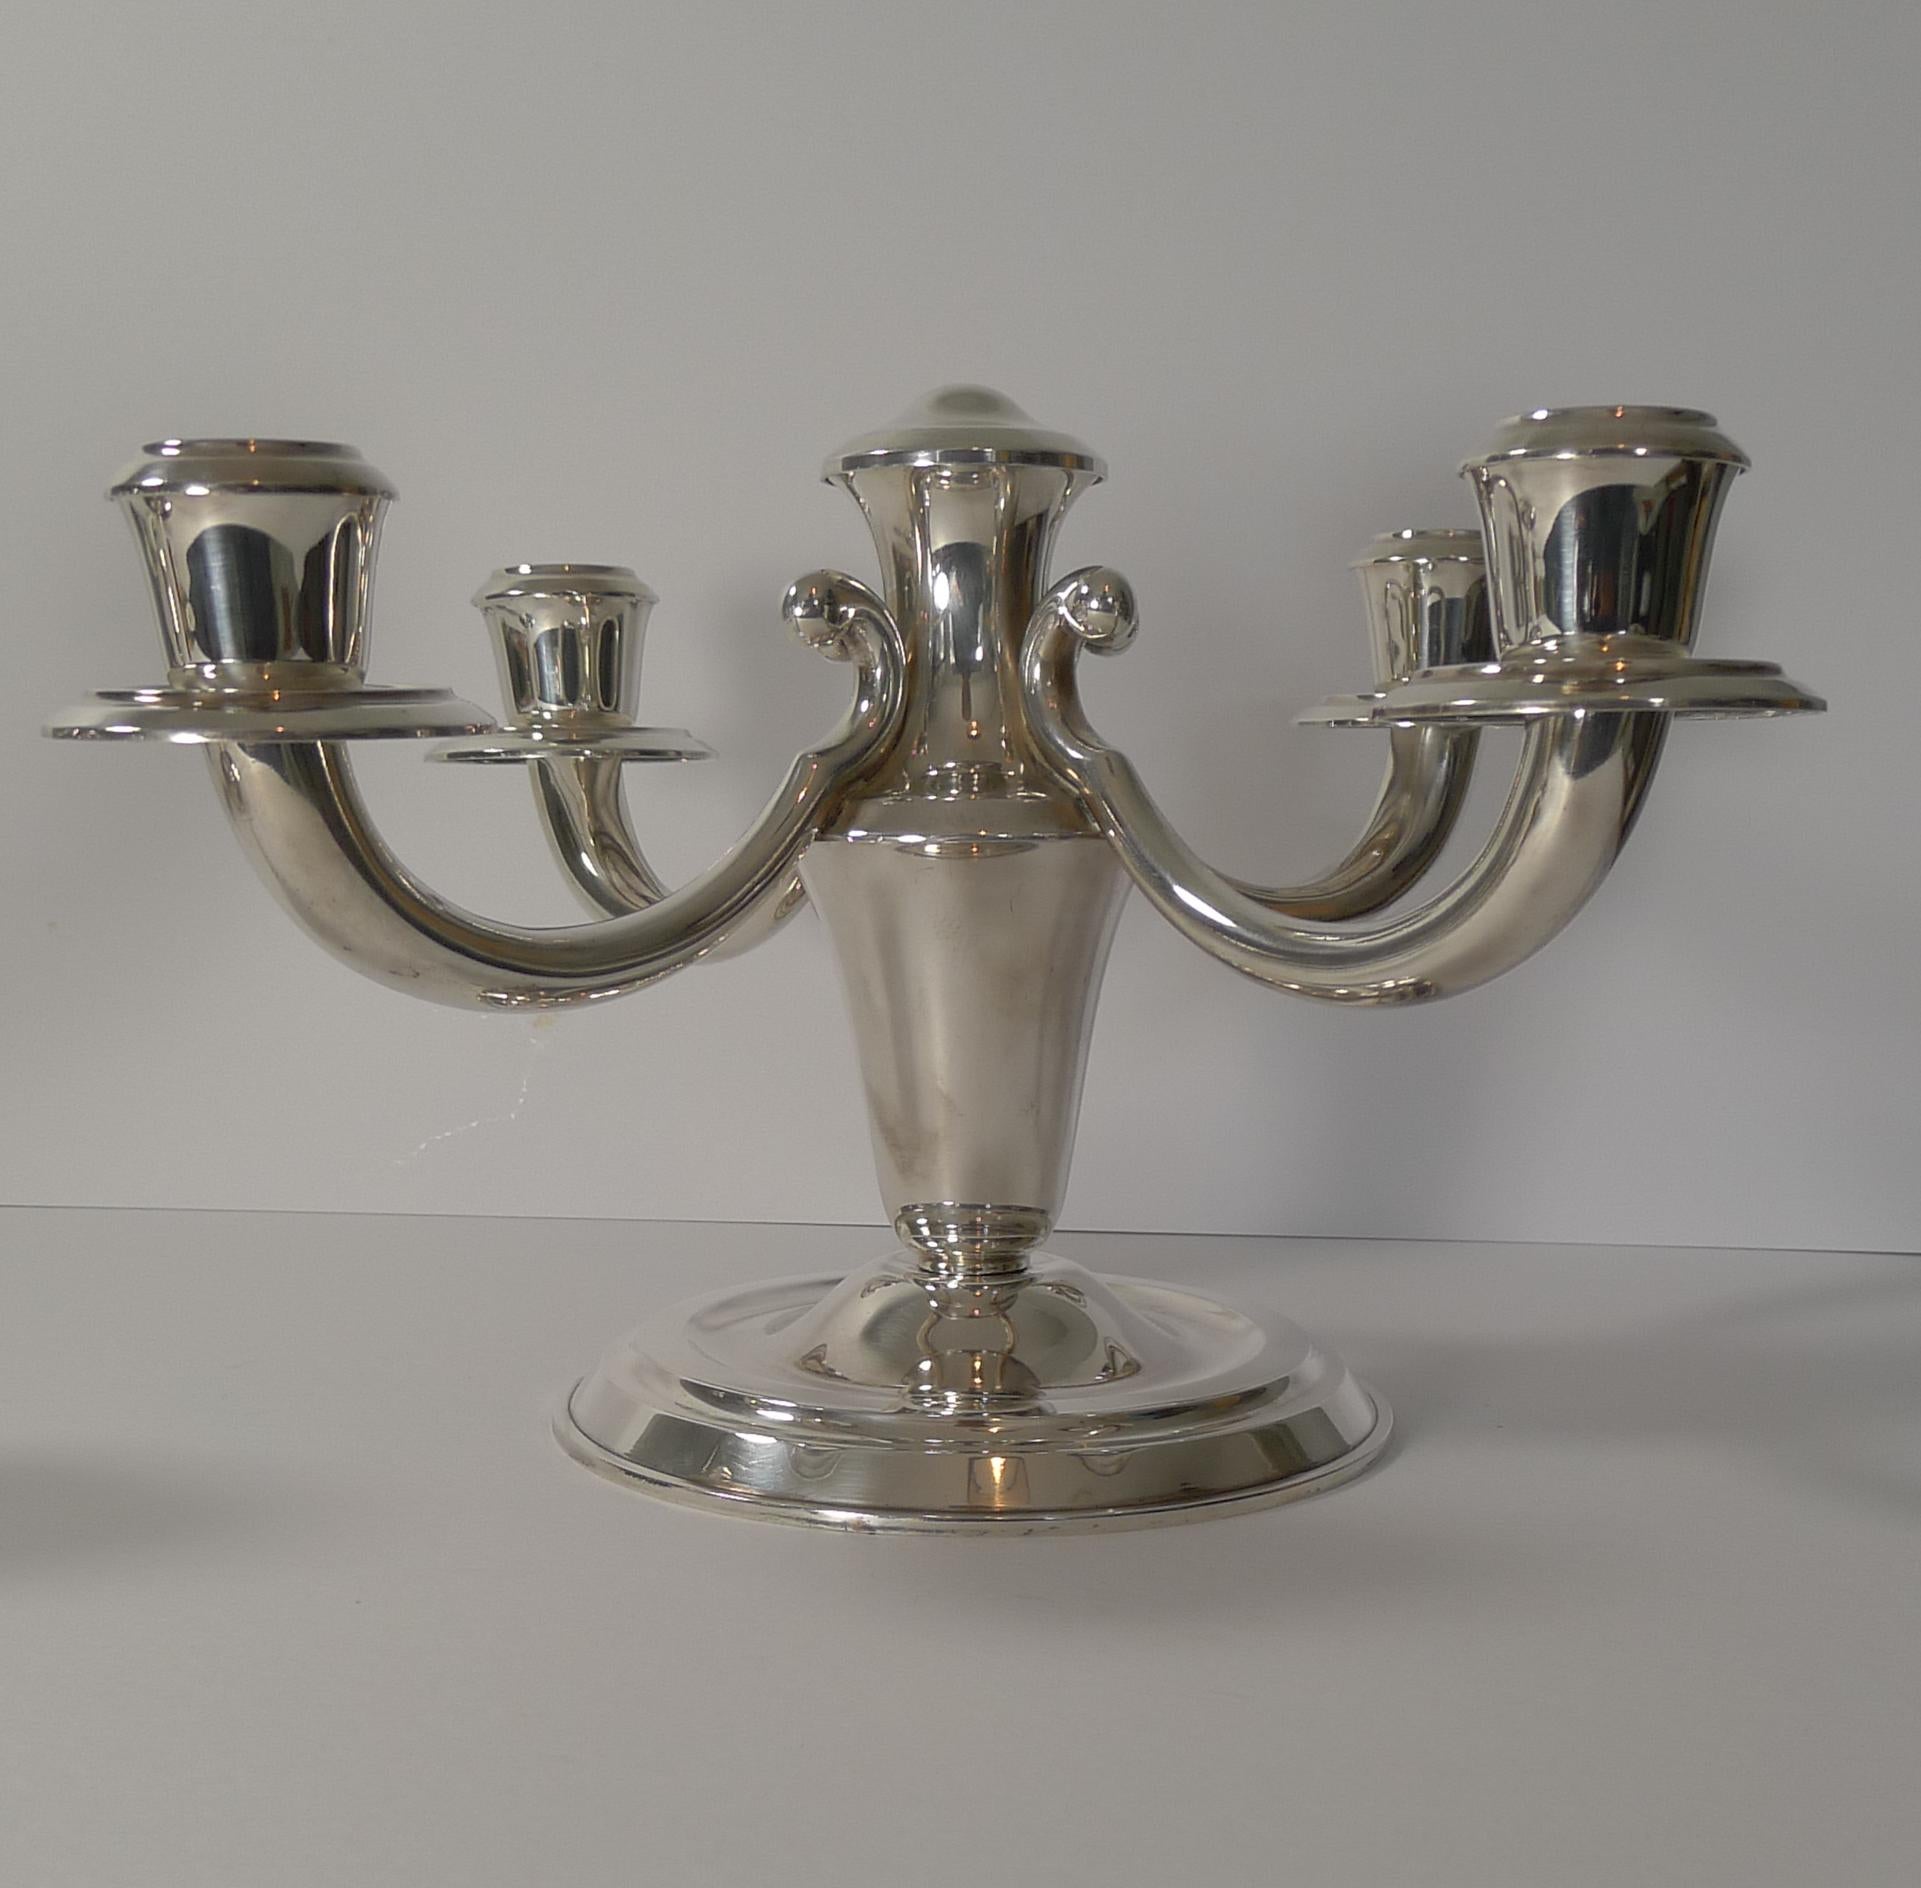 Pair of French Art Deco Candelabra in Silver Plate by Ravinet d'Enfert 3